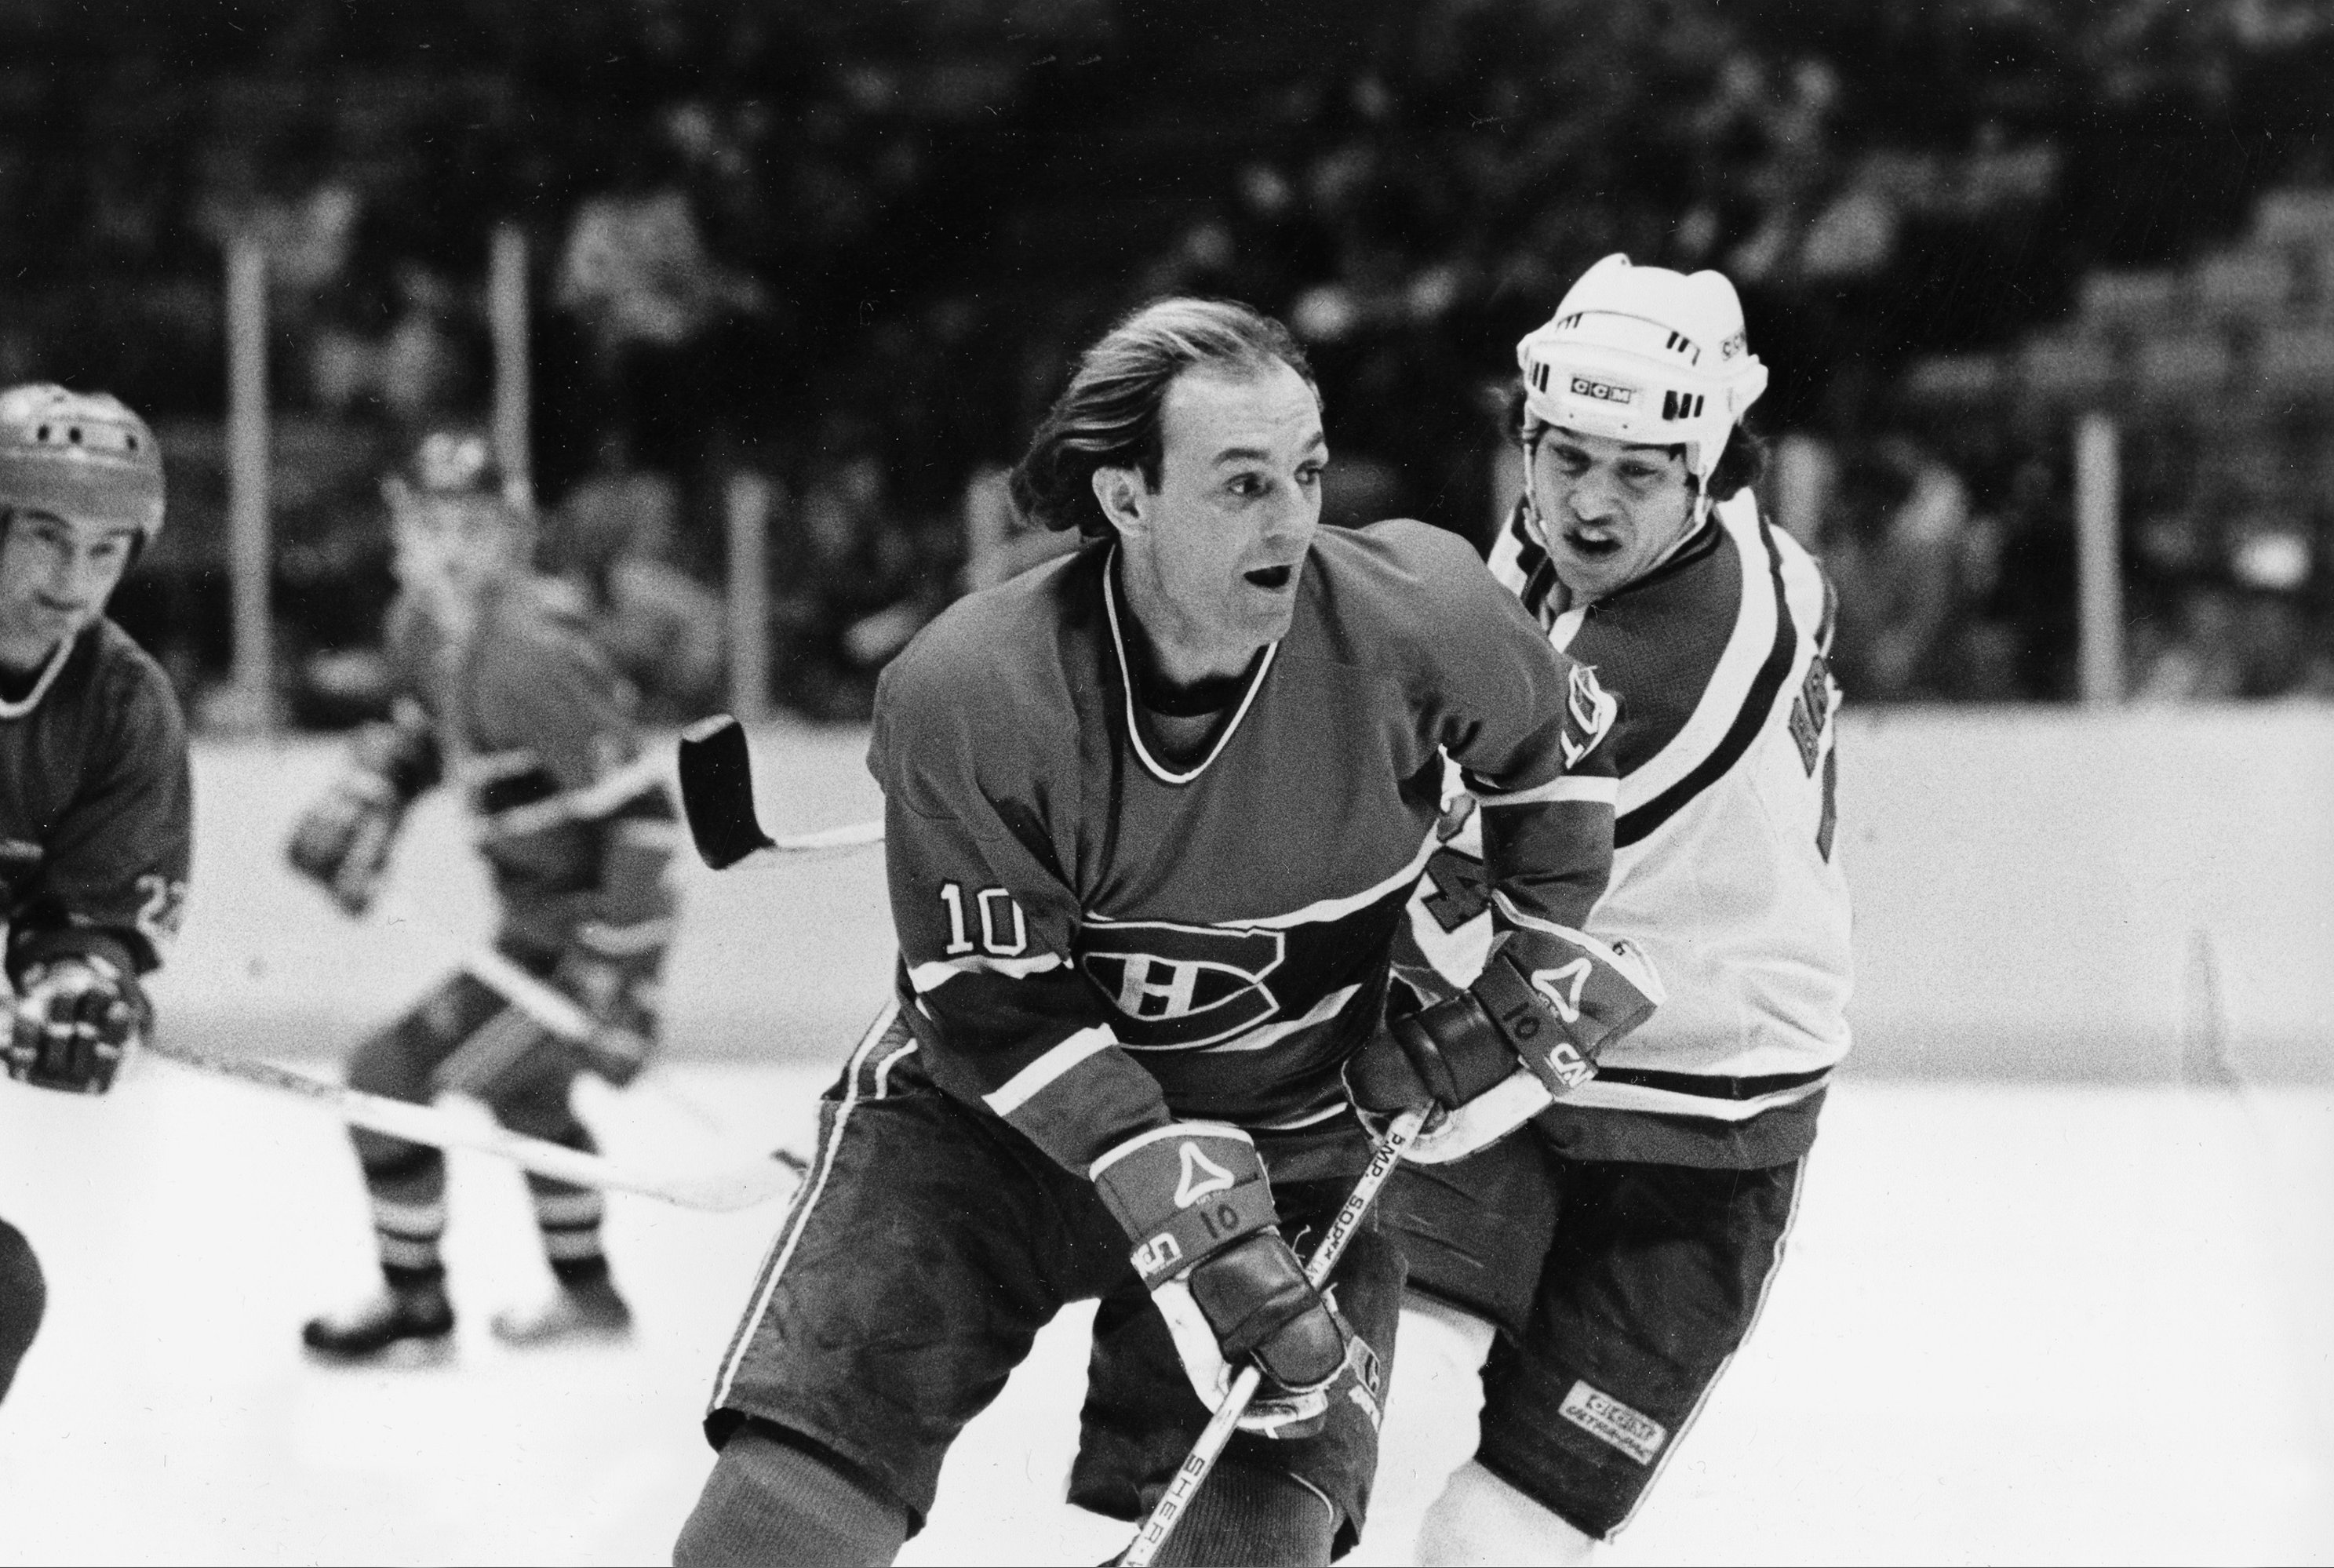 Audacy Sports - Ranking the Top 10 NHL Players of All-Time